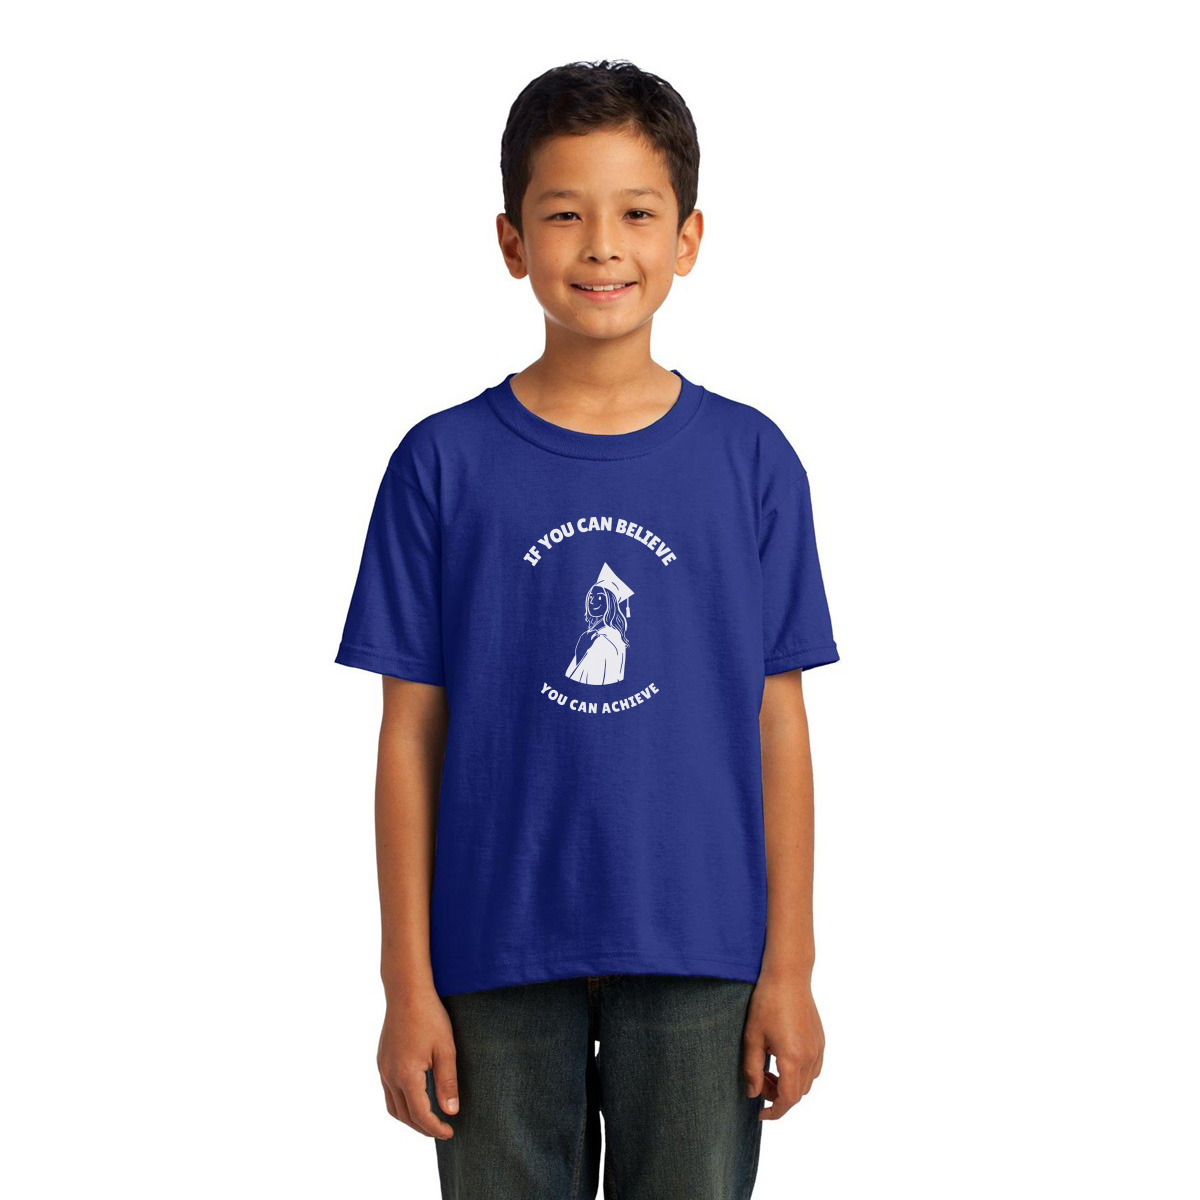 If You Can Believe You Can Achieve Kids T-shirt | Blue